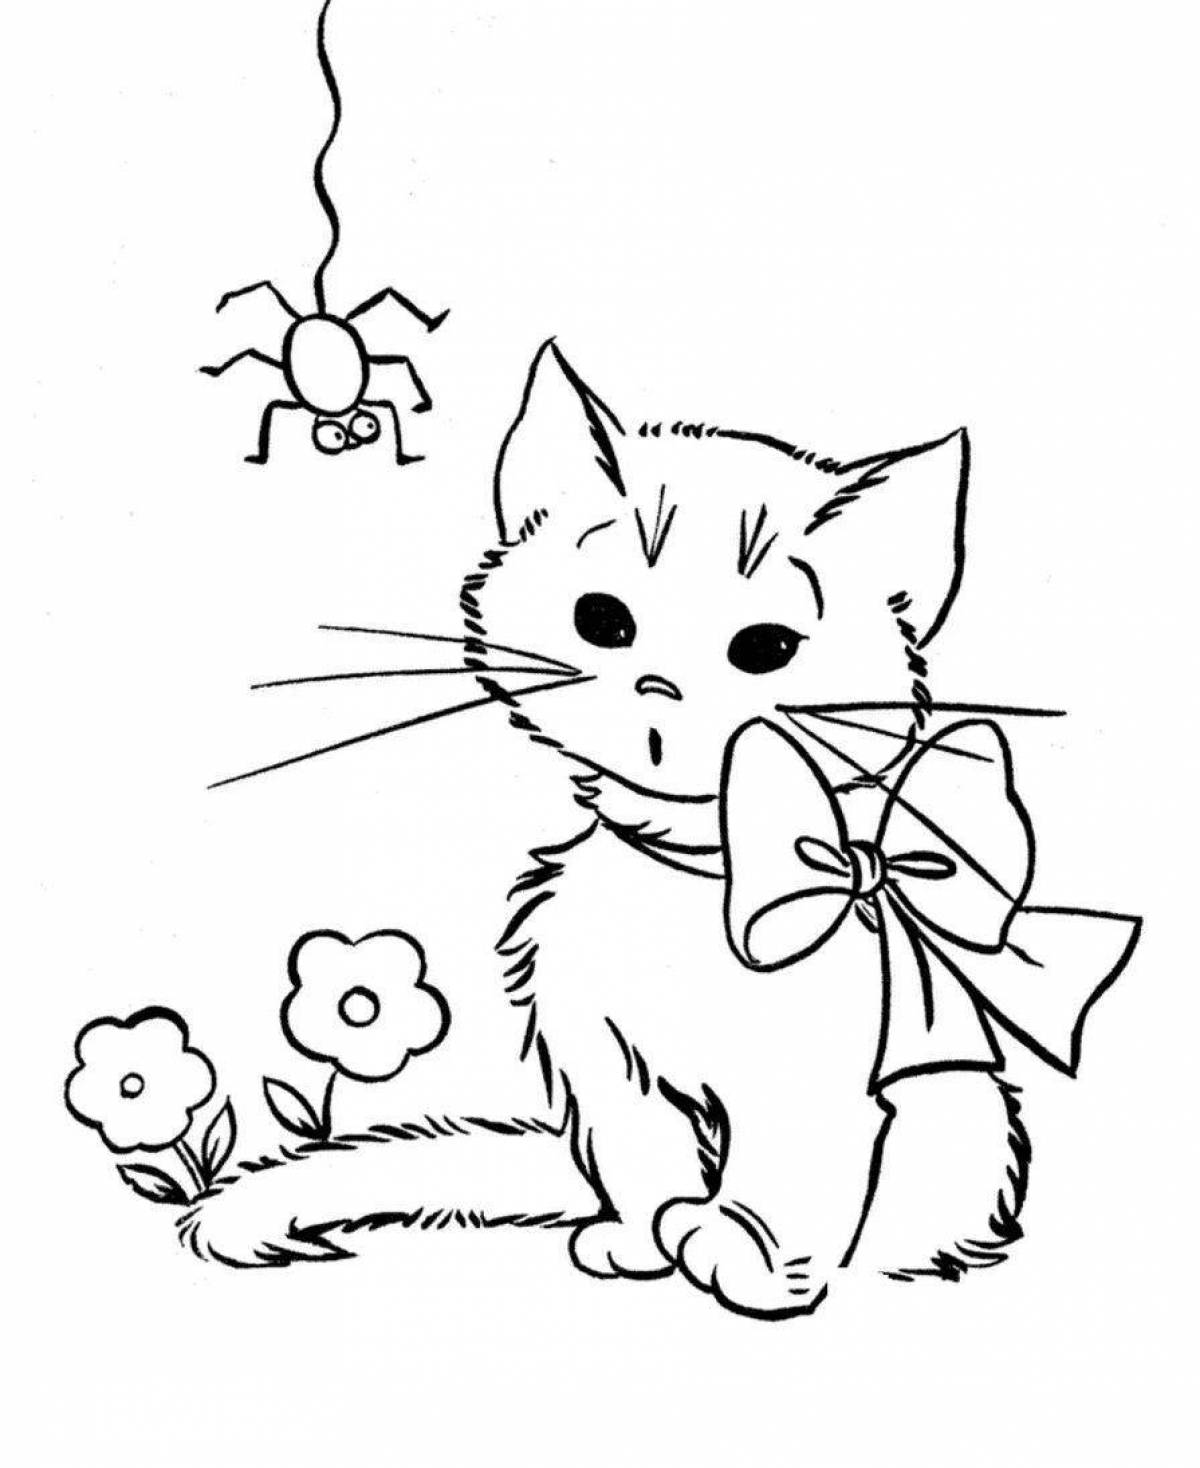 Amazing coloring pages for little kittens